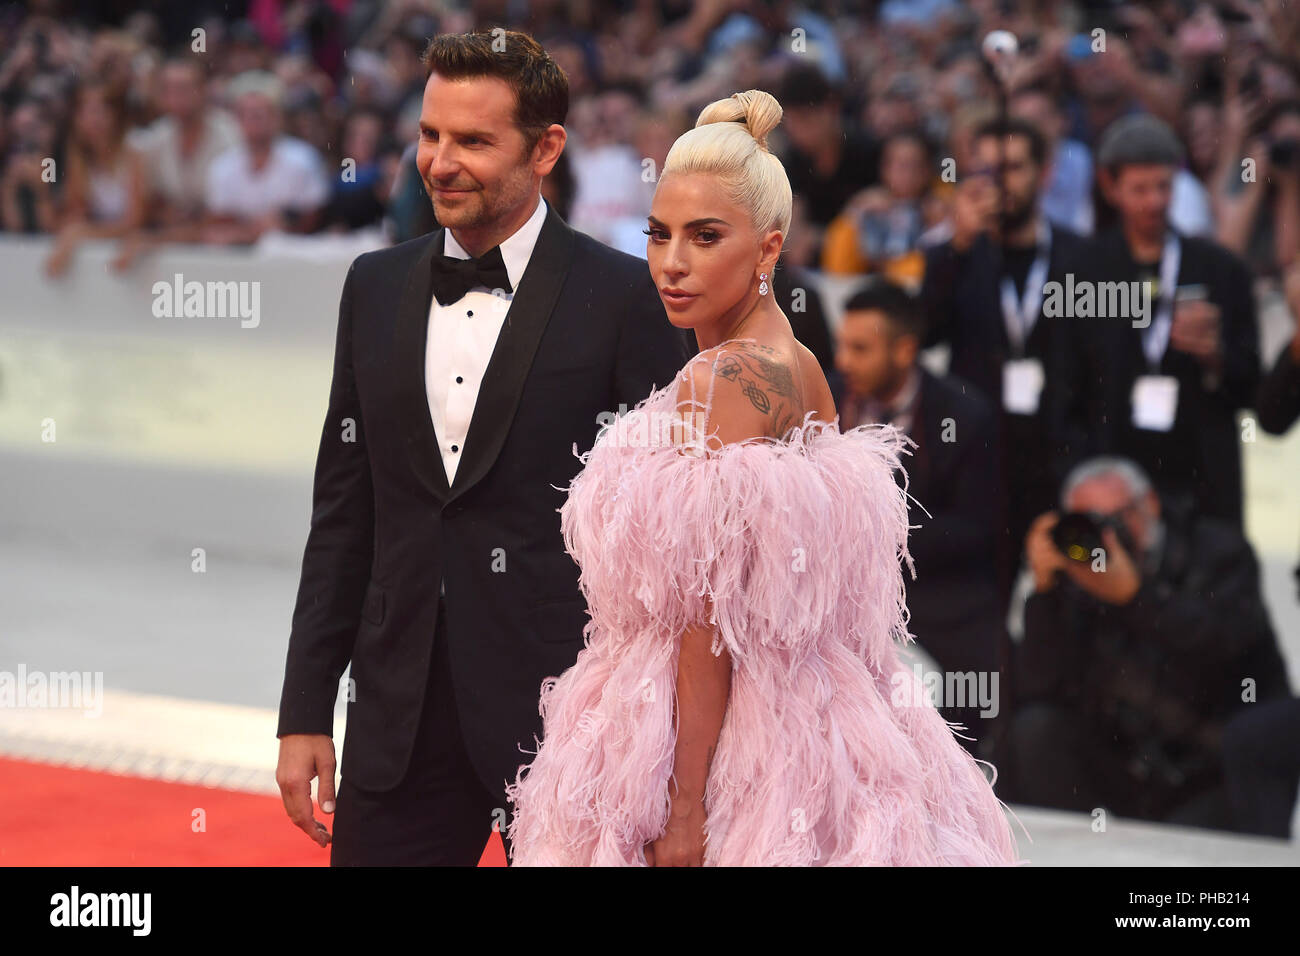 Venice, Italy. 31st Aug, 2018. The singer Lady Gaga and the actor and director Bradley Cooper walk the red carpet at the world premiere of the film musical 'A Star is Born' at the Venice Film Festival. The film festival runs from 29 August to 8 September and is taking place for the 75th time this year. Credit: Felix Hörhager/dpa/Alamy Live News Stock Photo